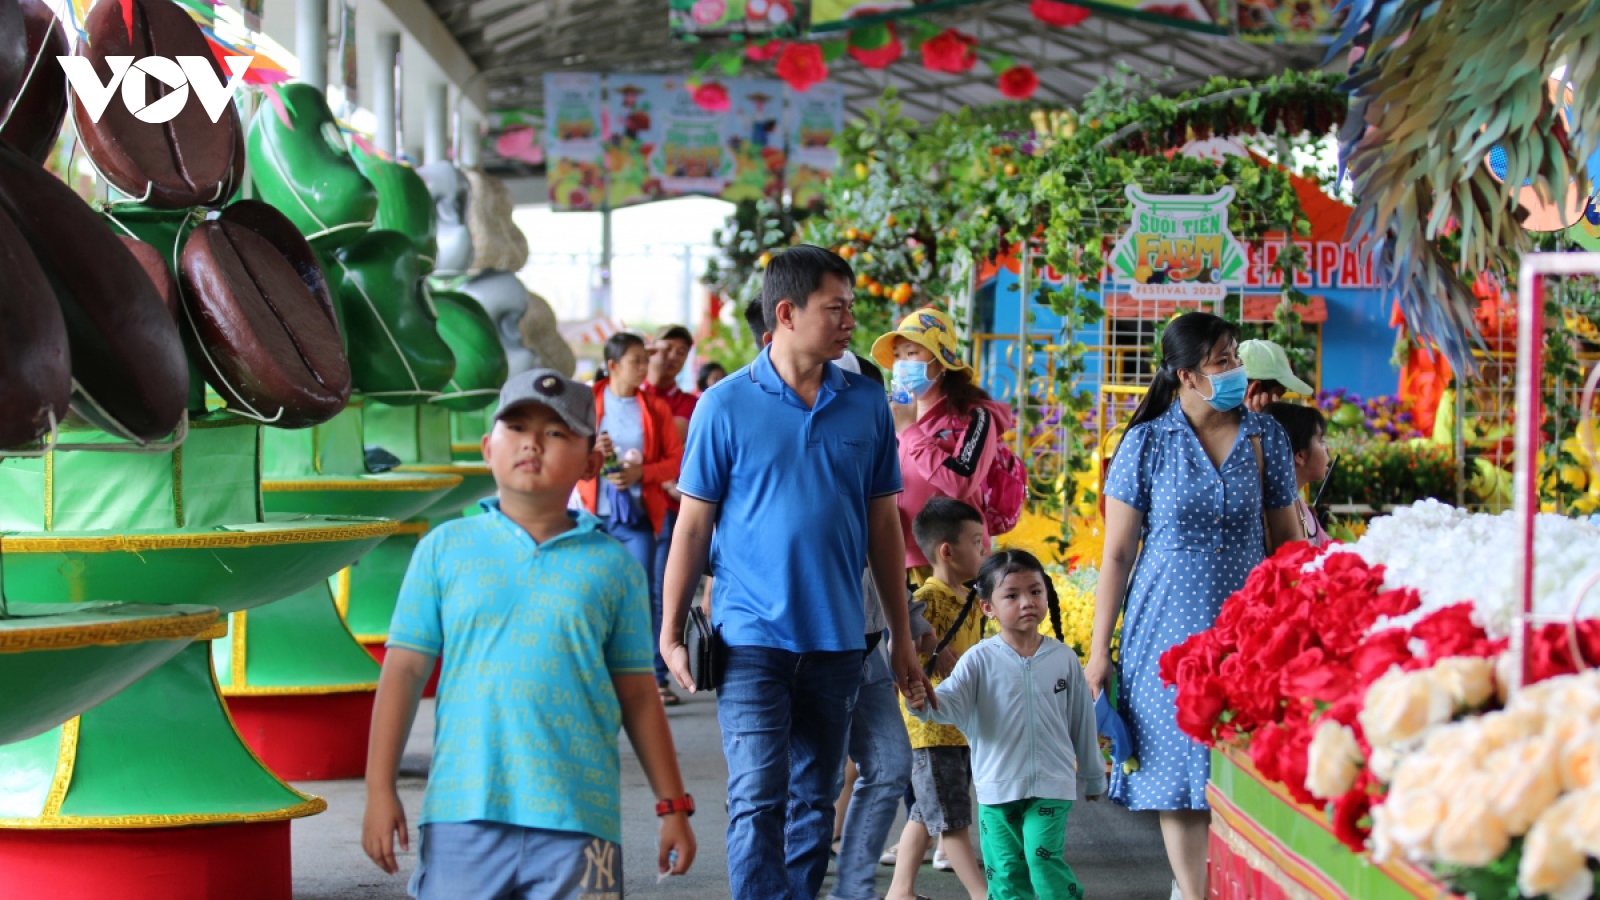 Annual Southern Fruit Festival launched in HCM City